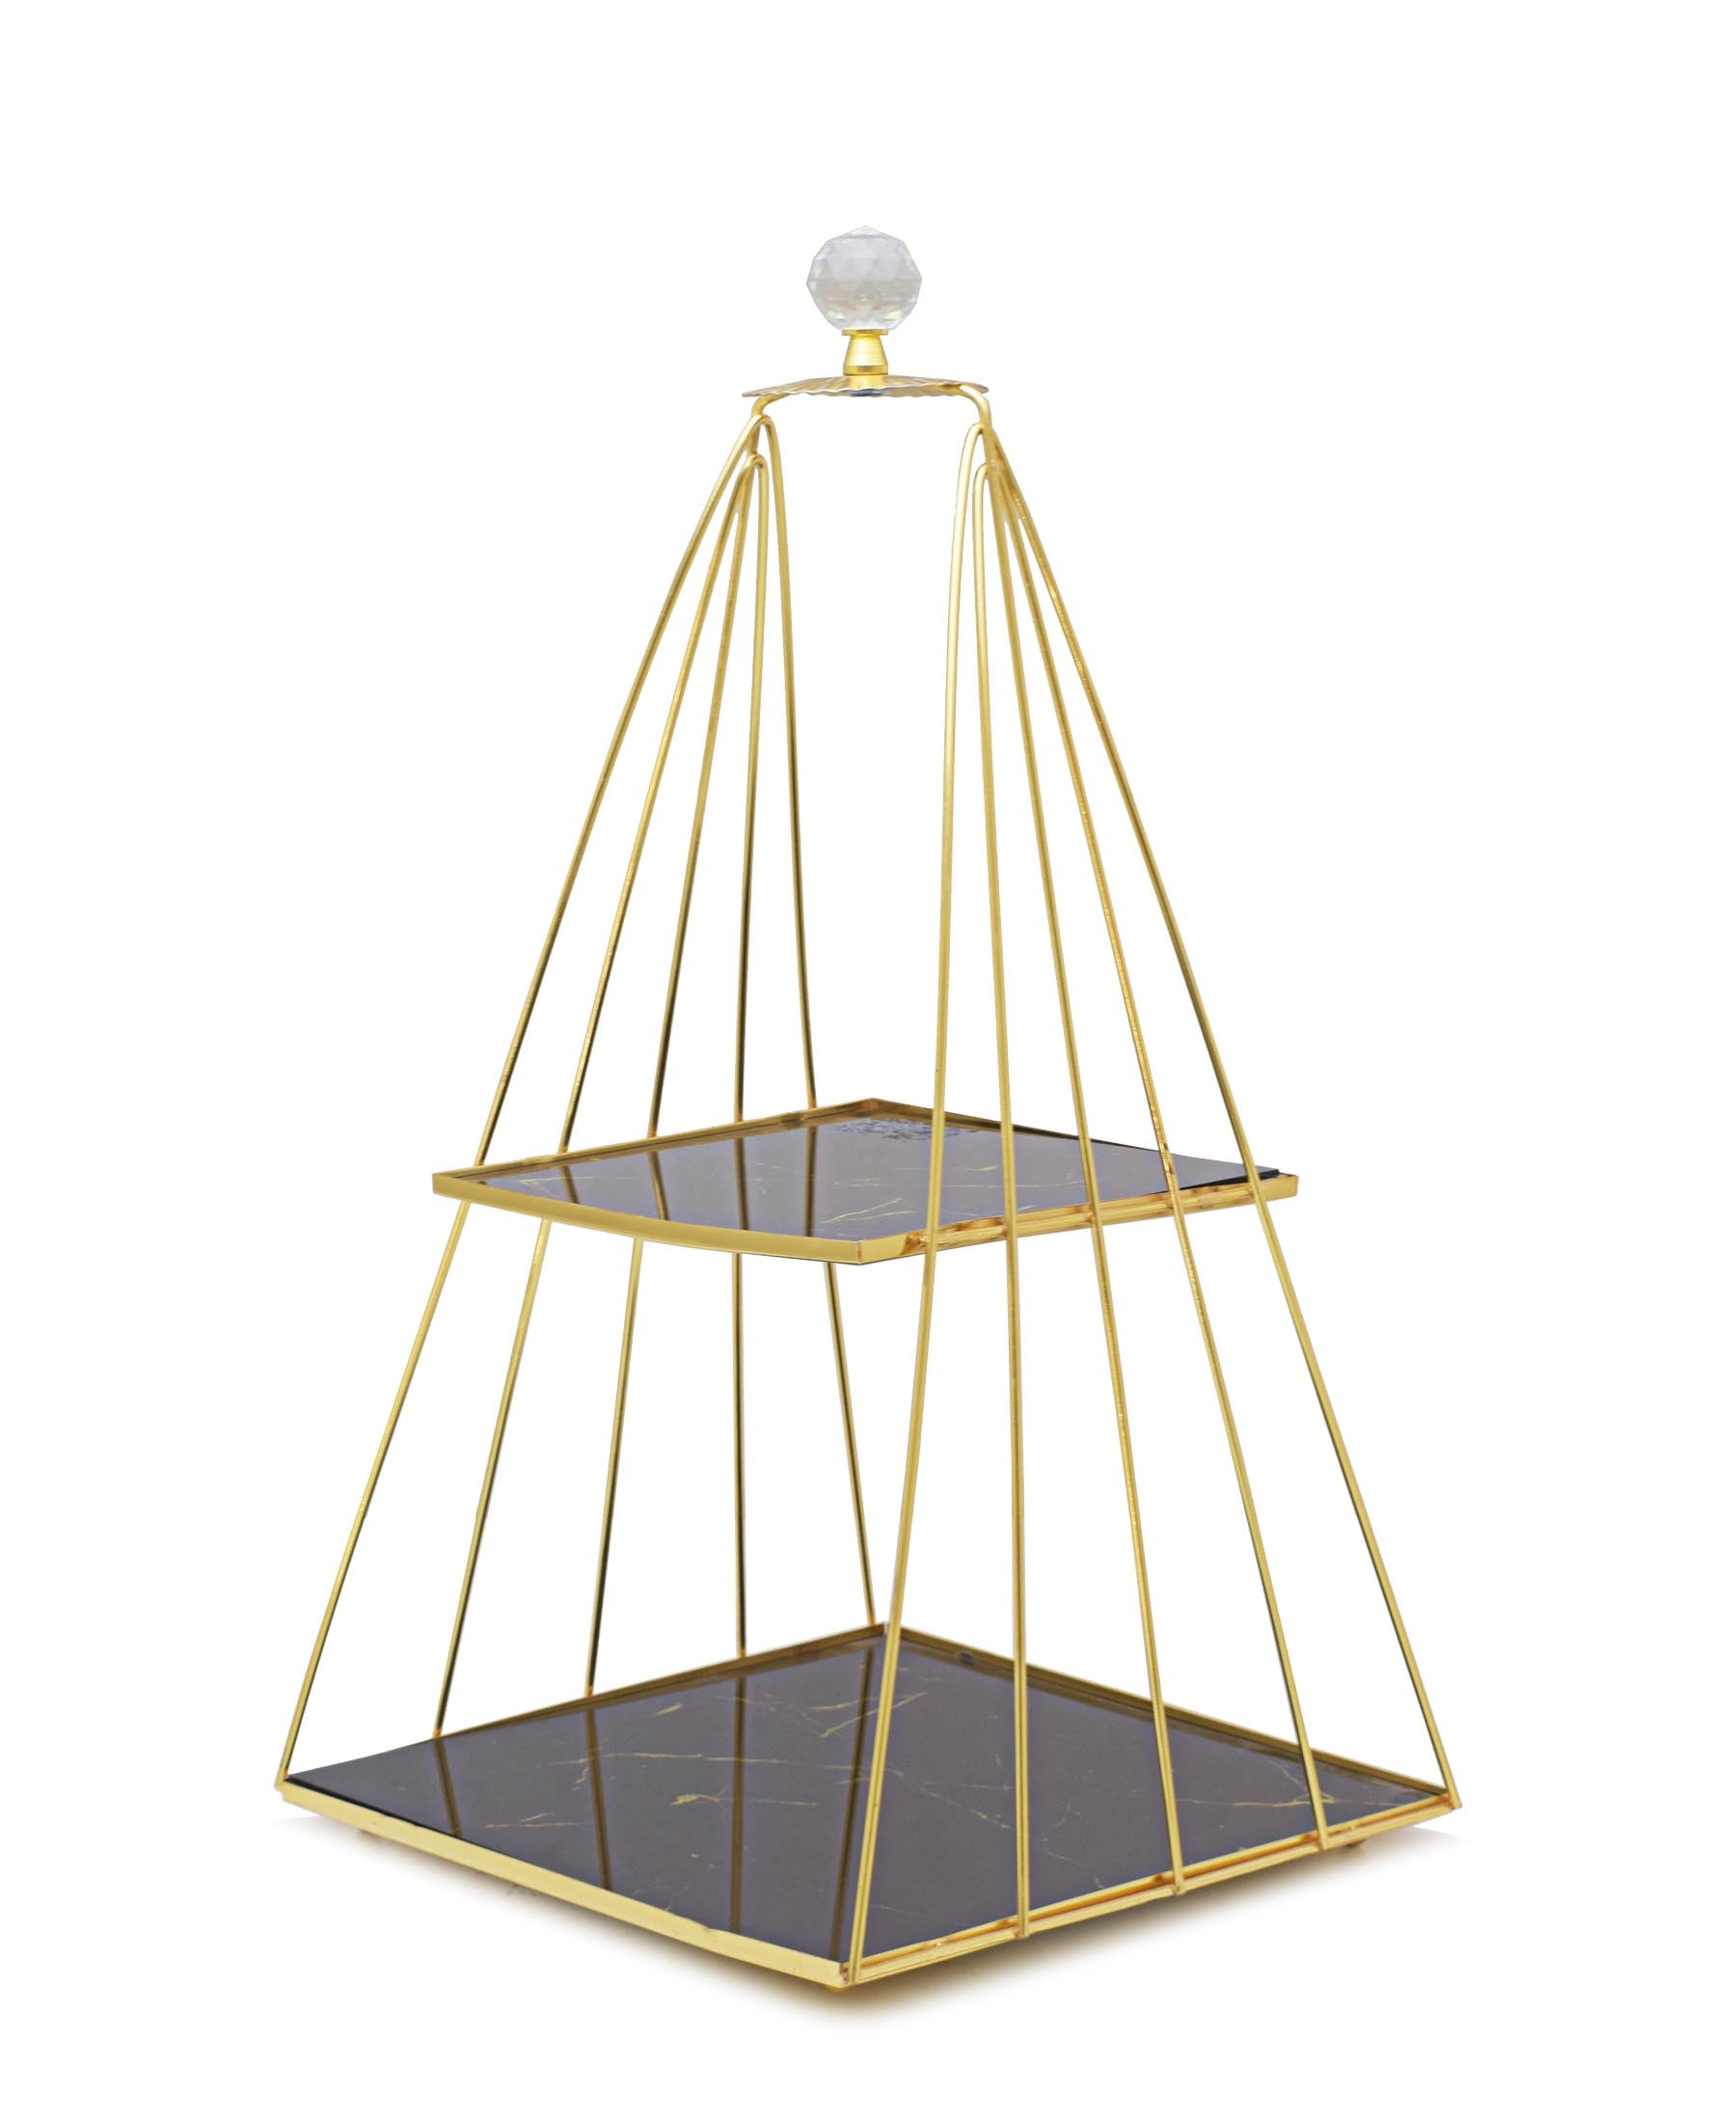 Bursa Collection 2 Tier Stand With Tray - Gold